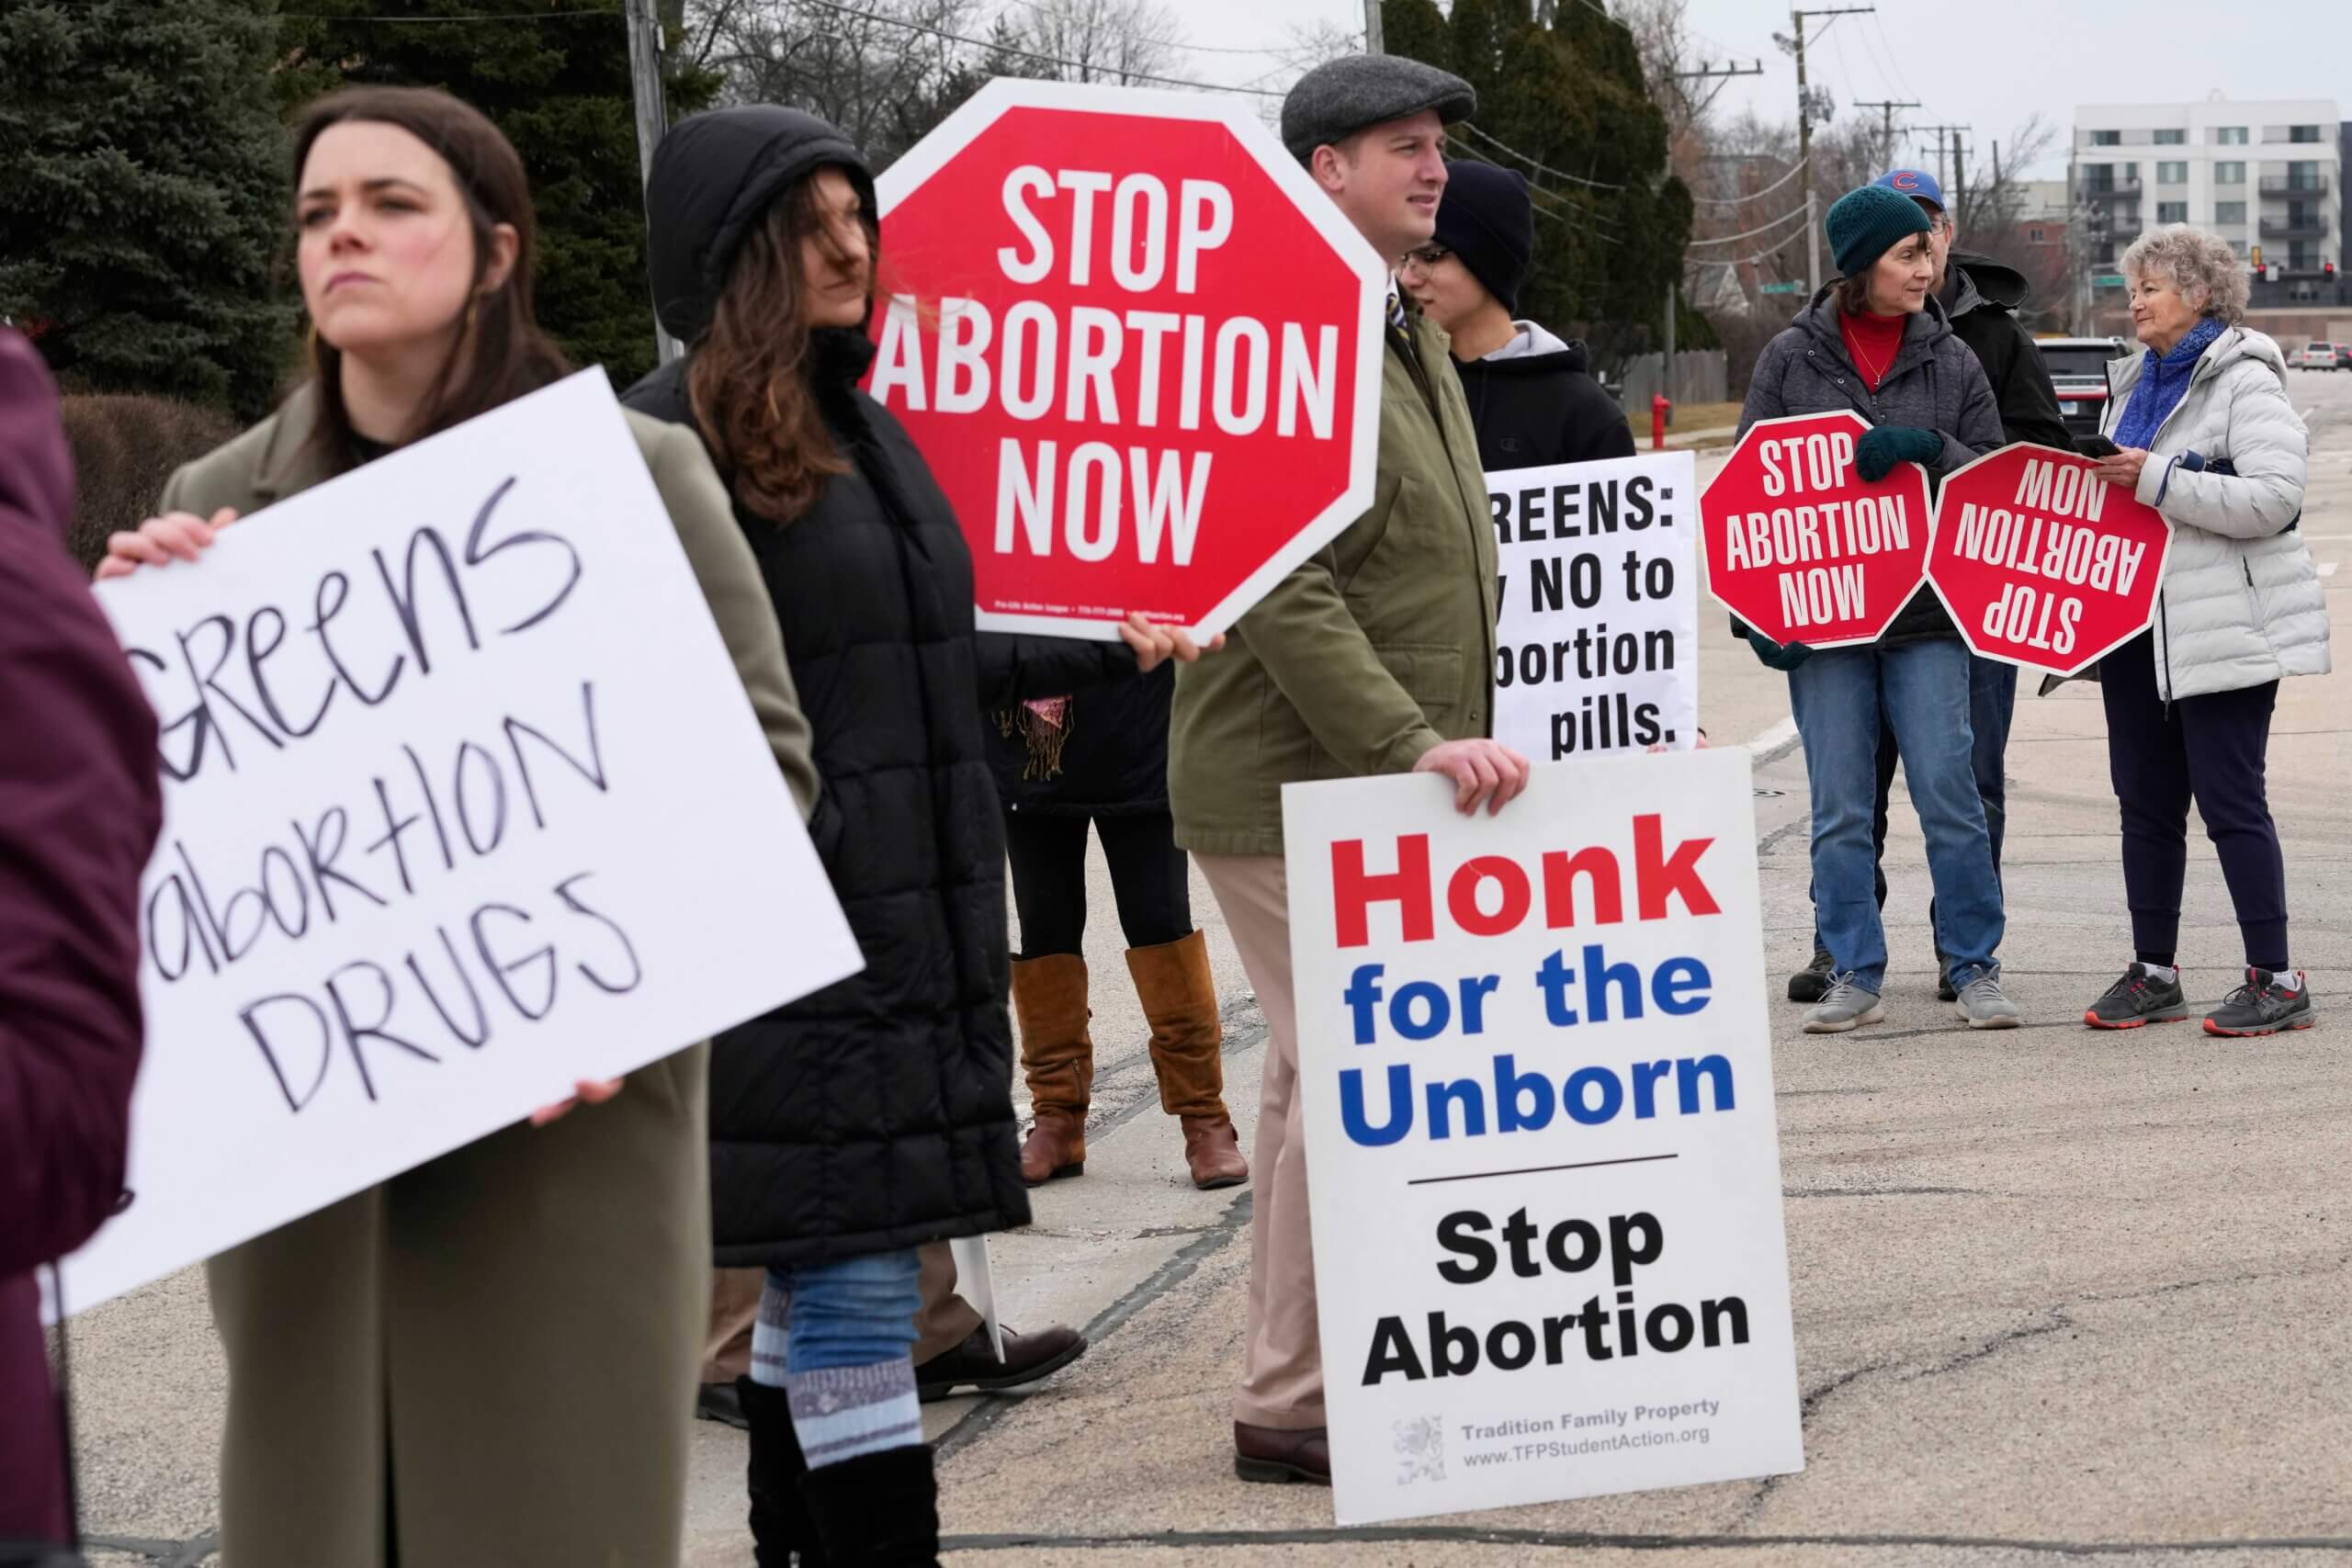 Anti-abortion groups protest near the Walgreens Deerfield headquarters over a plan to sell abortion pills in Deerfield, Ill., Tuesday, Feb. 14, 2023.